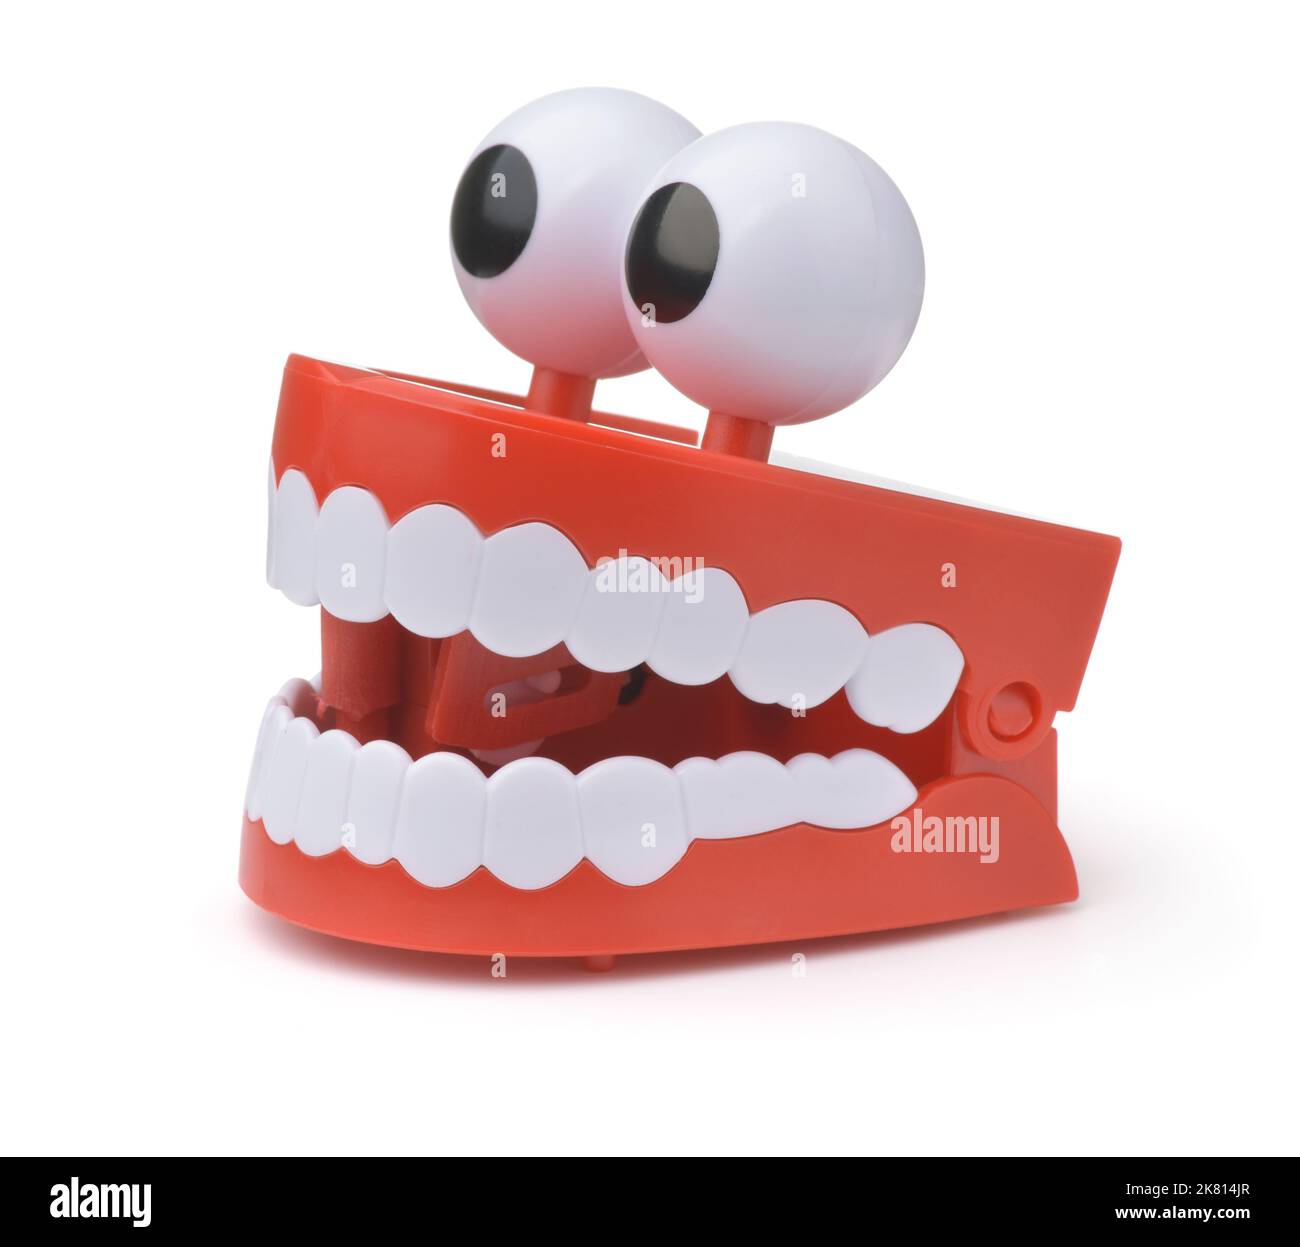 Funny toy clockwork jumping teeth with eyes isolated on white Stock Photo